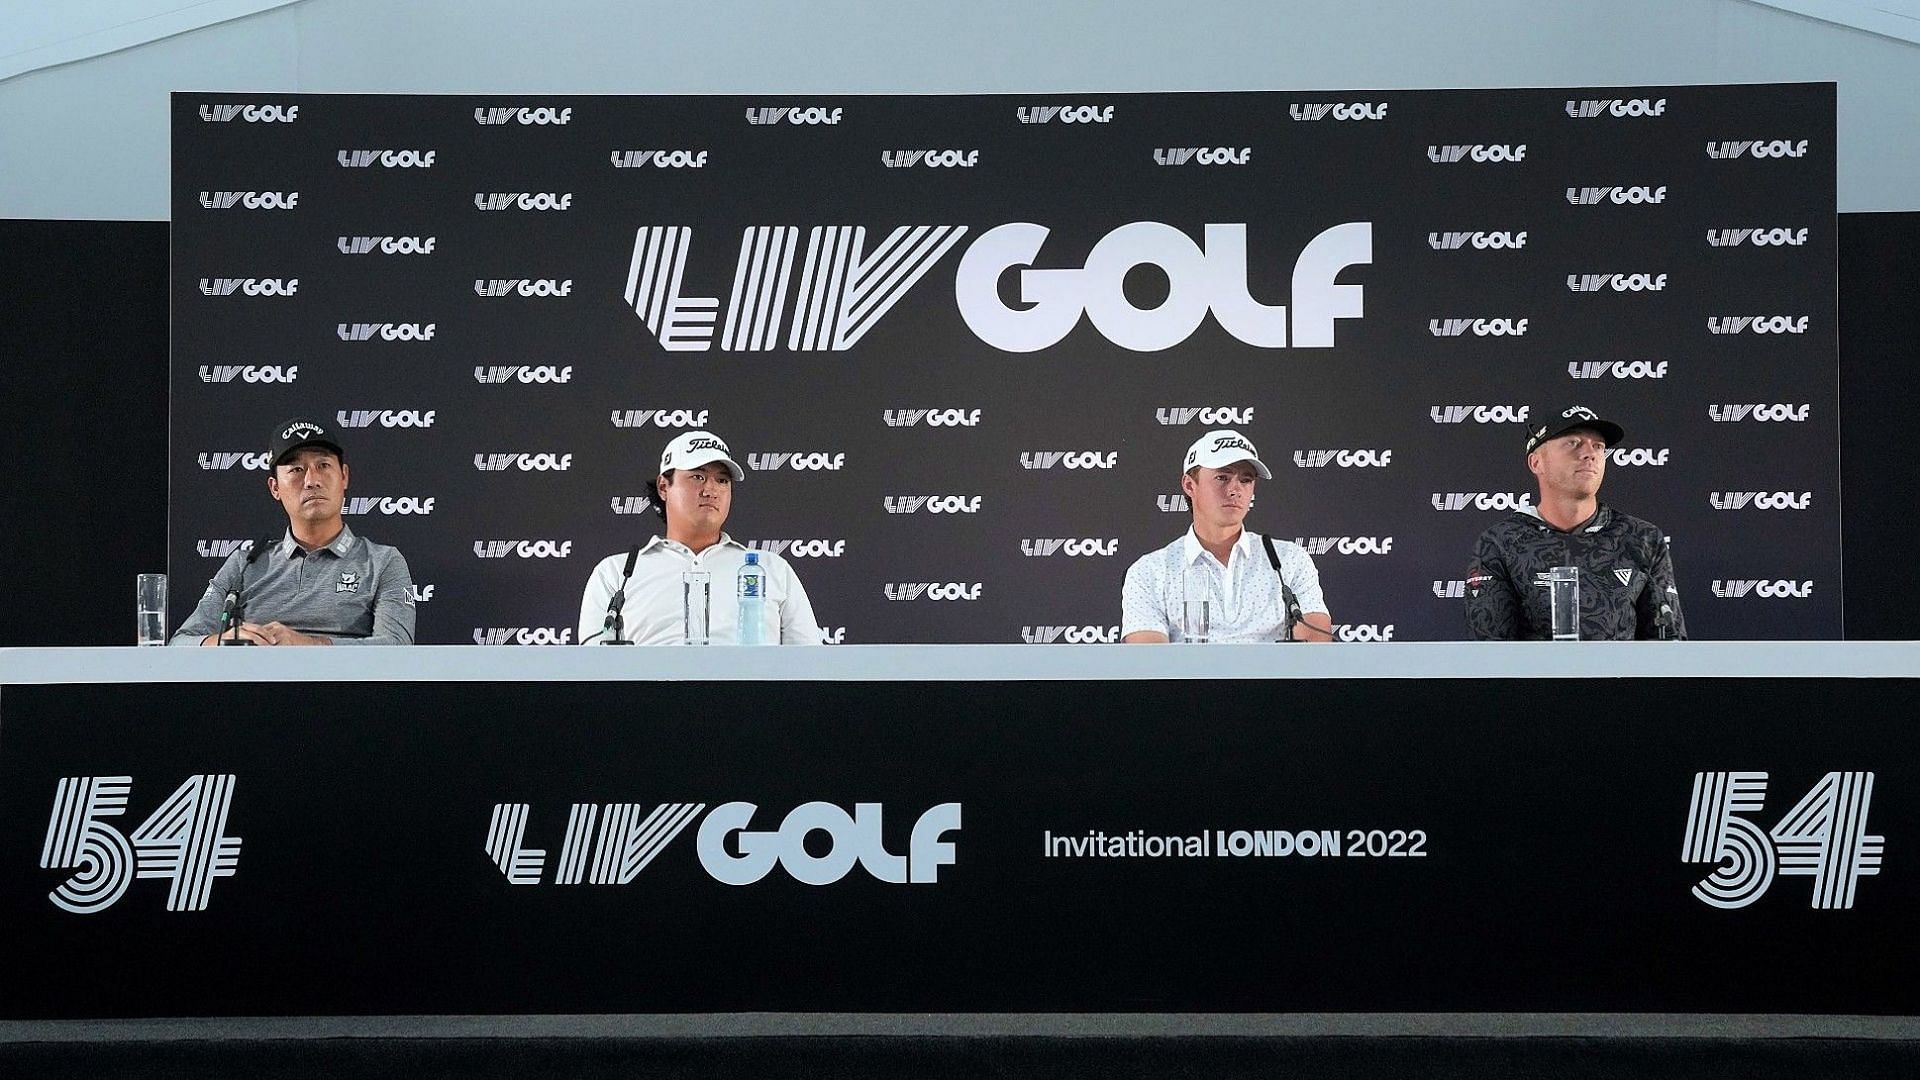 OWGR Controversy surrounding LIV Golf reveals deeper issues